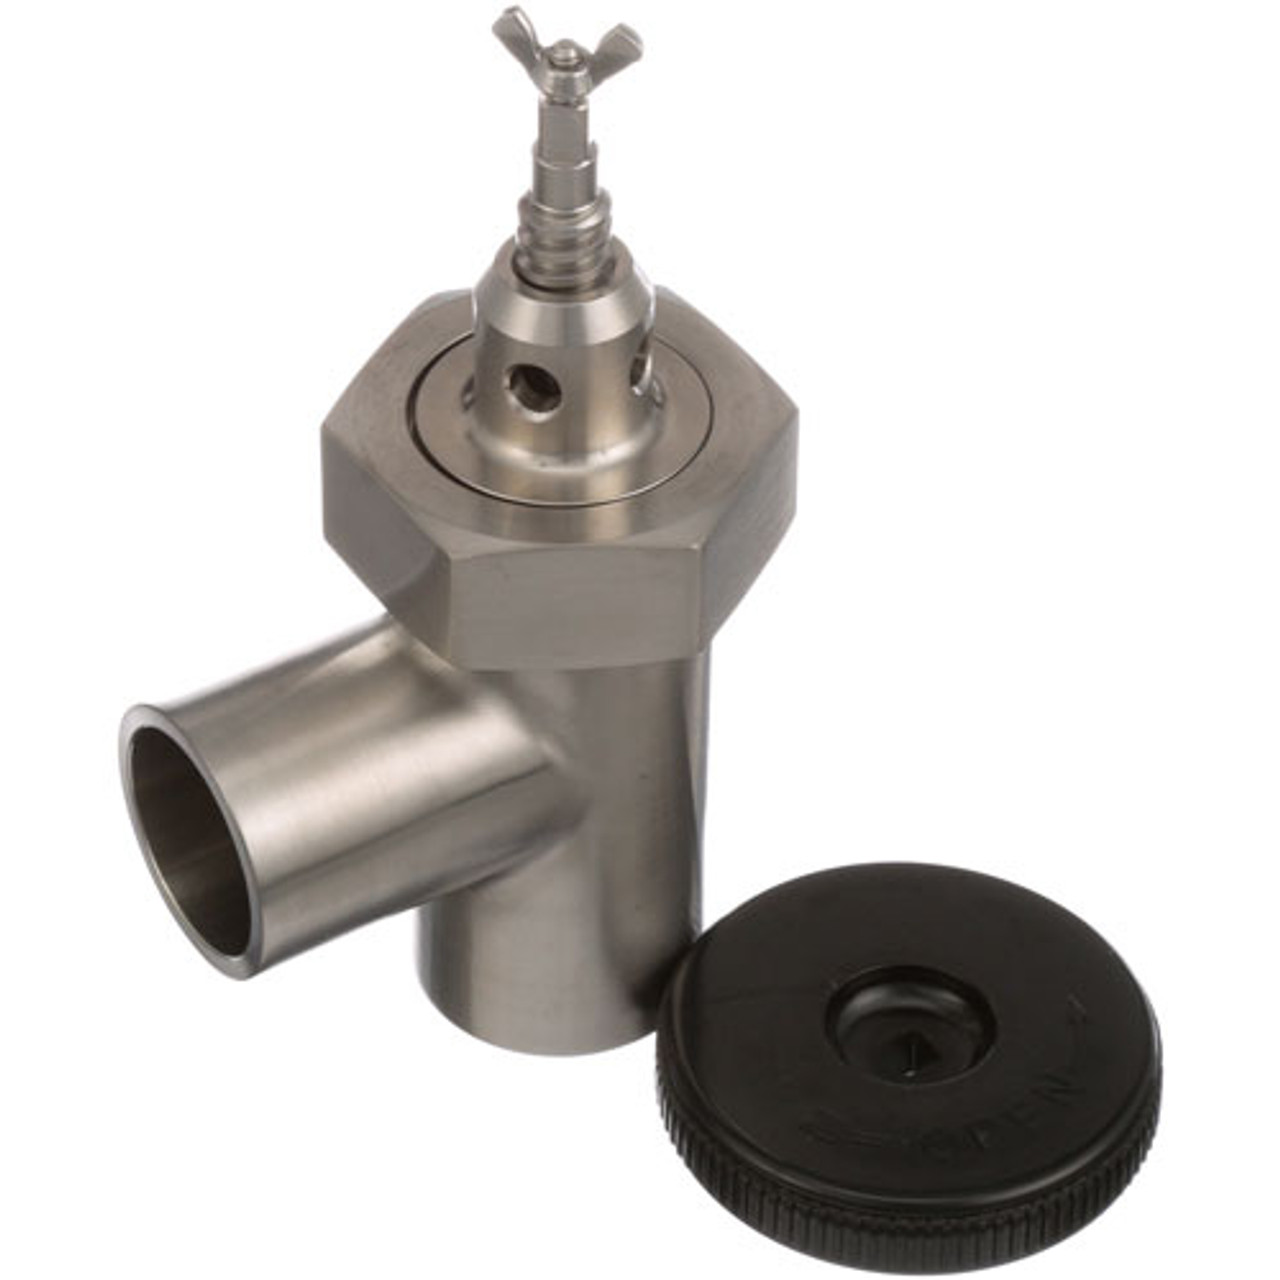 Kettle Faucet , 1-1/2" Draw Off Valve - Replacement Part For Legion 440057-01